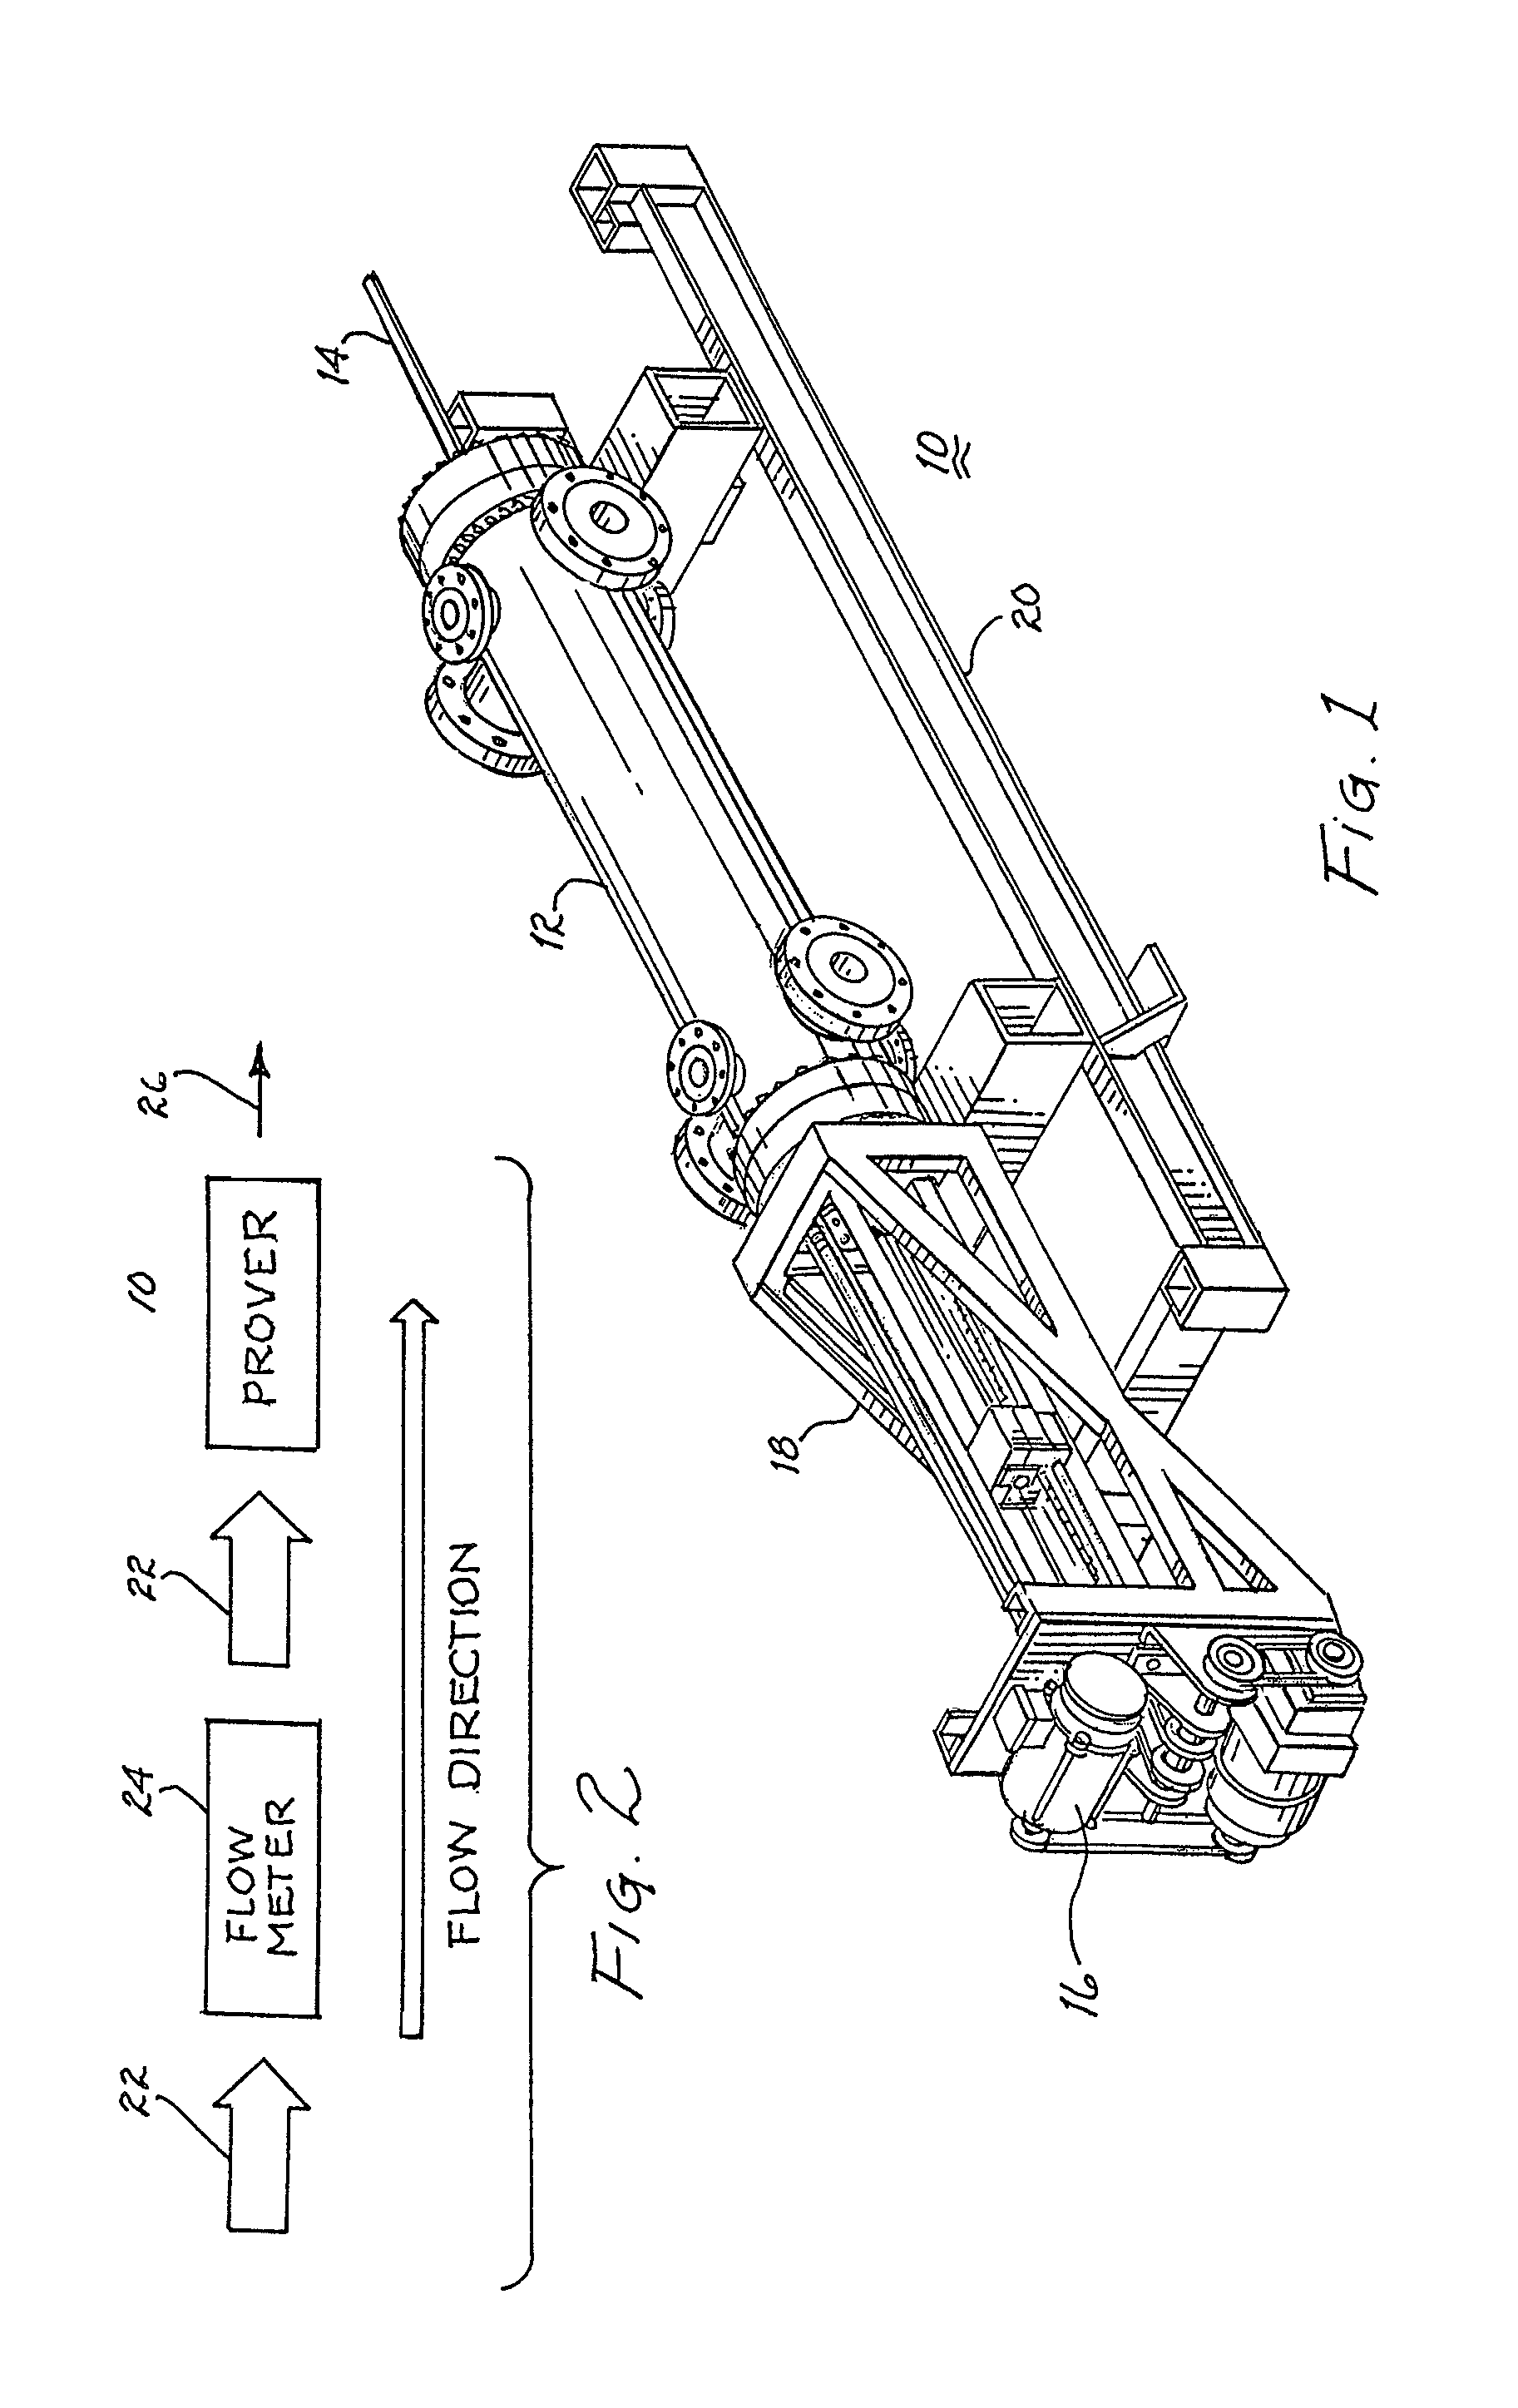 Prover self testing and validation apparatus